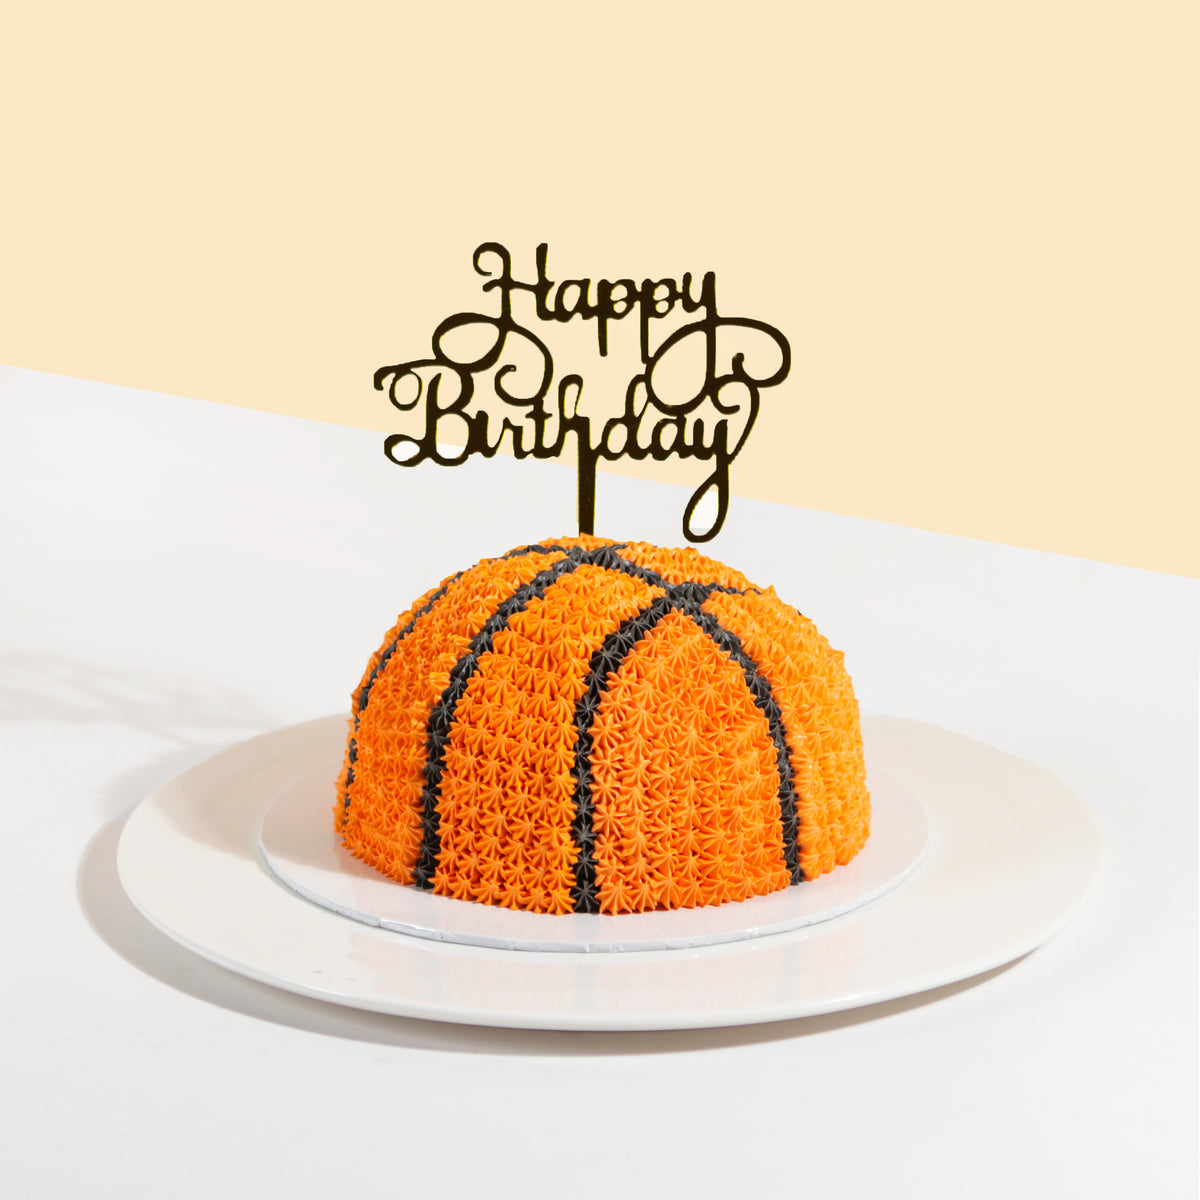 Amazon.com: Basketball 1/4 sheet (10.5 x 8 in.) Edible cake topper image  Birthday Party Decoration. : Grocery & Gourmet Food